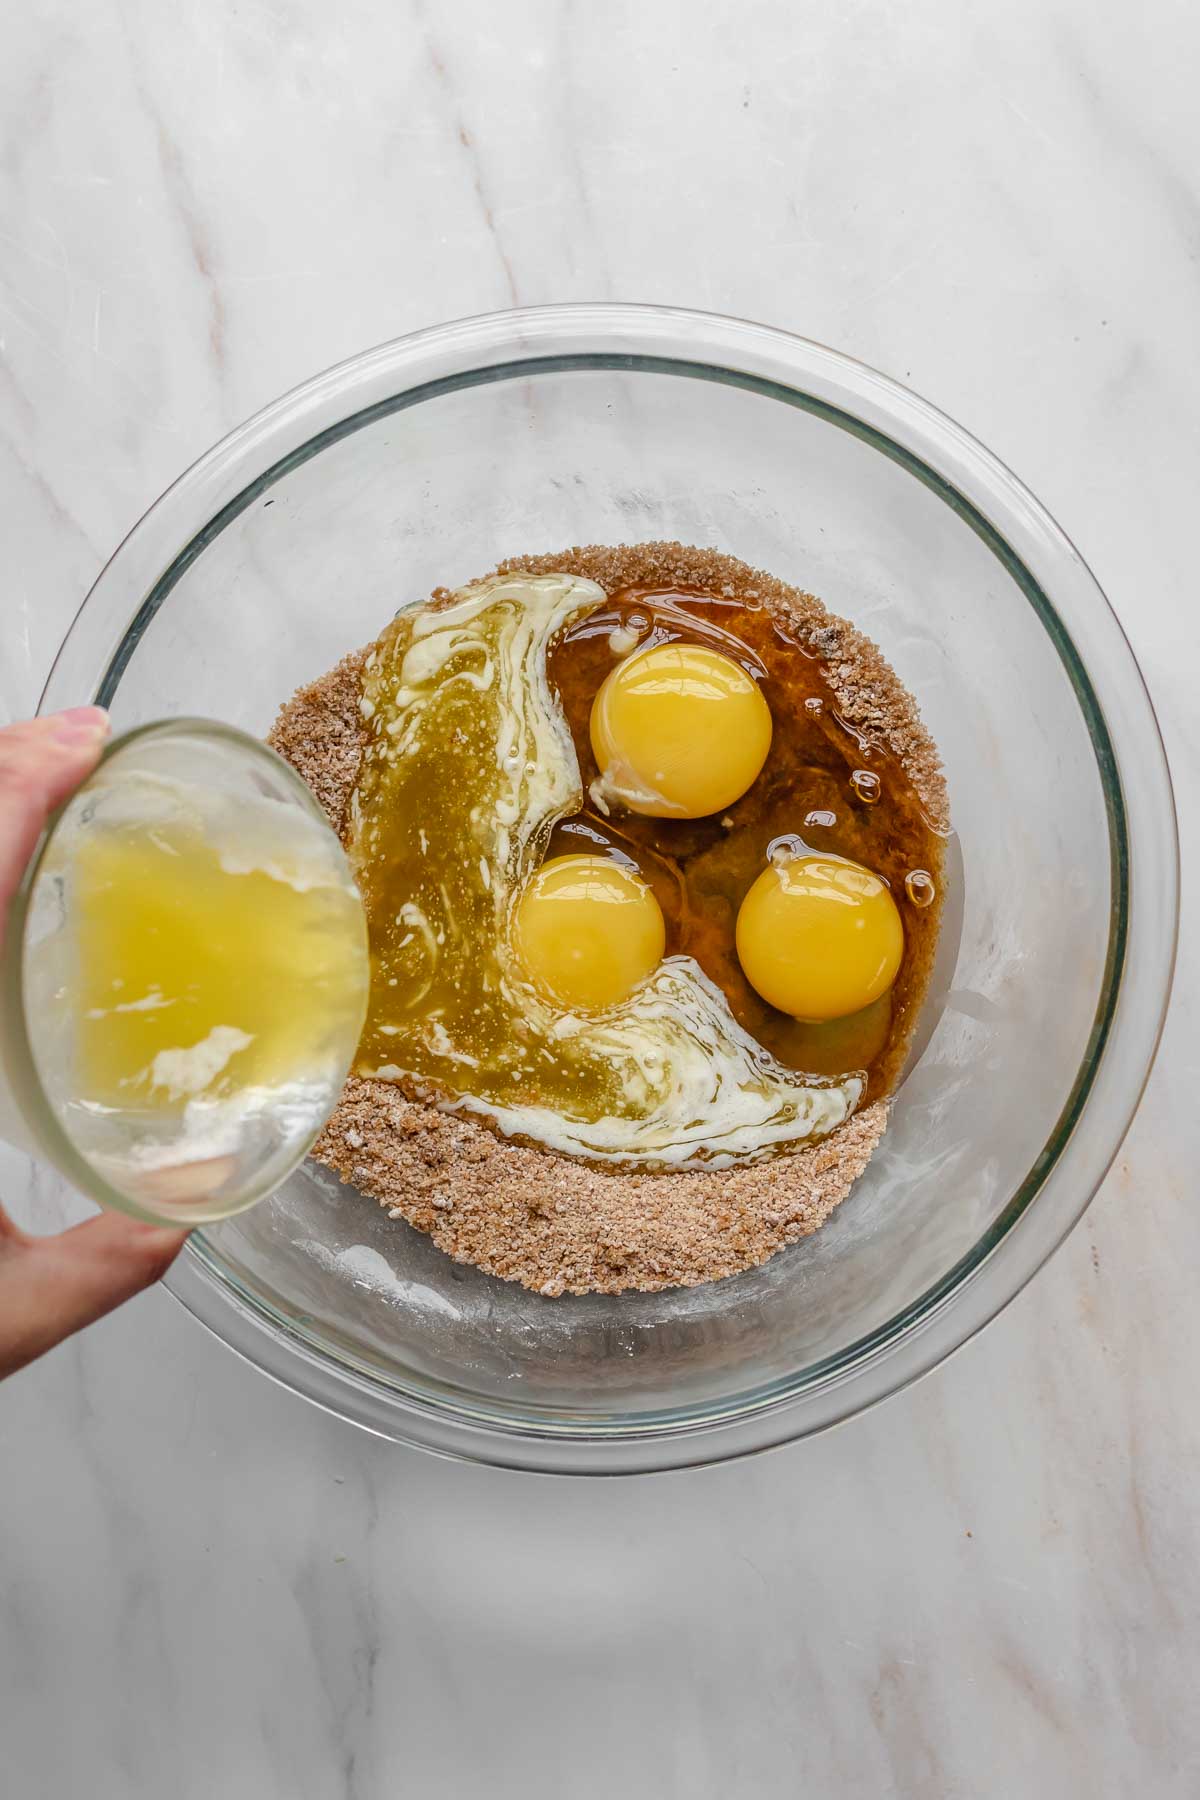 Eggs and butter being added to a mixing bowl.